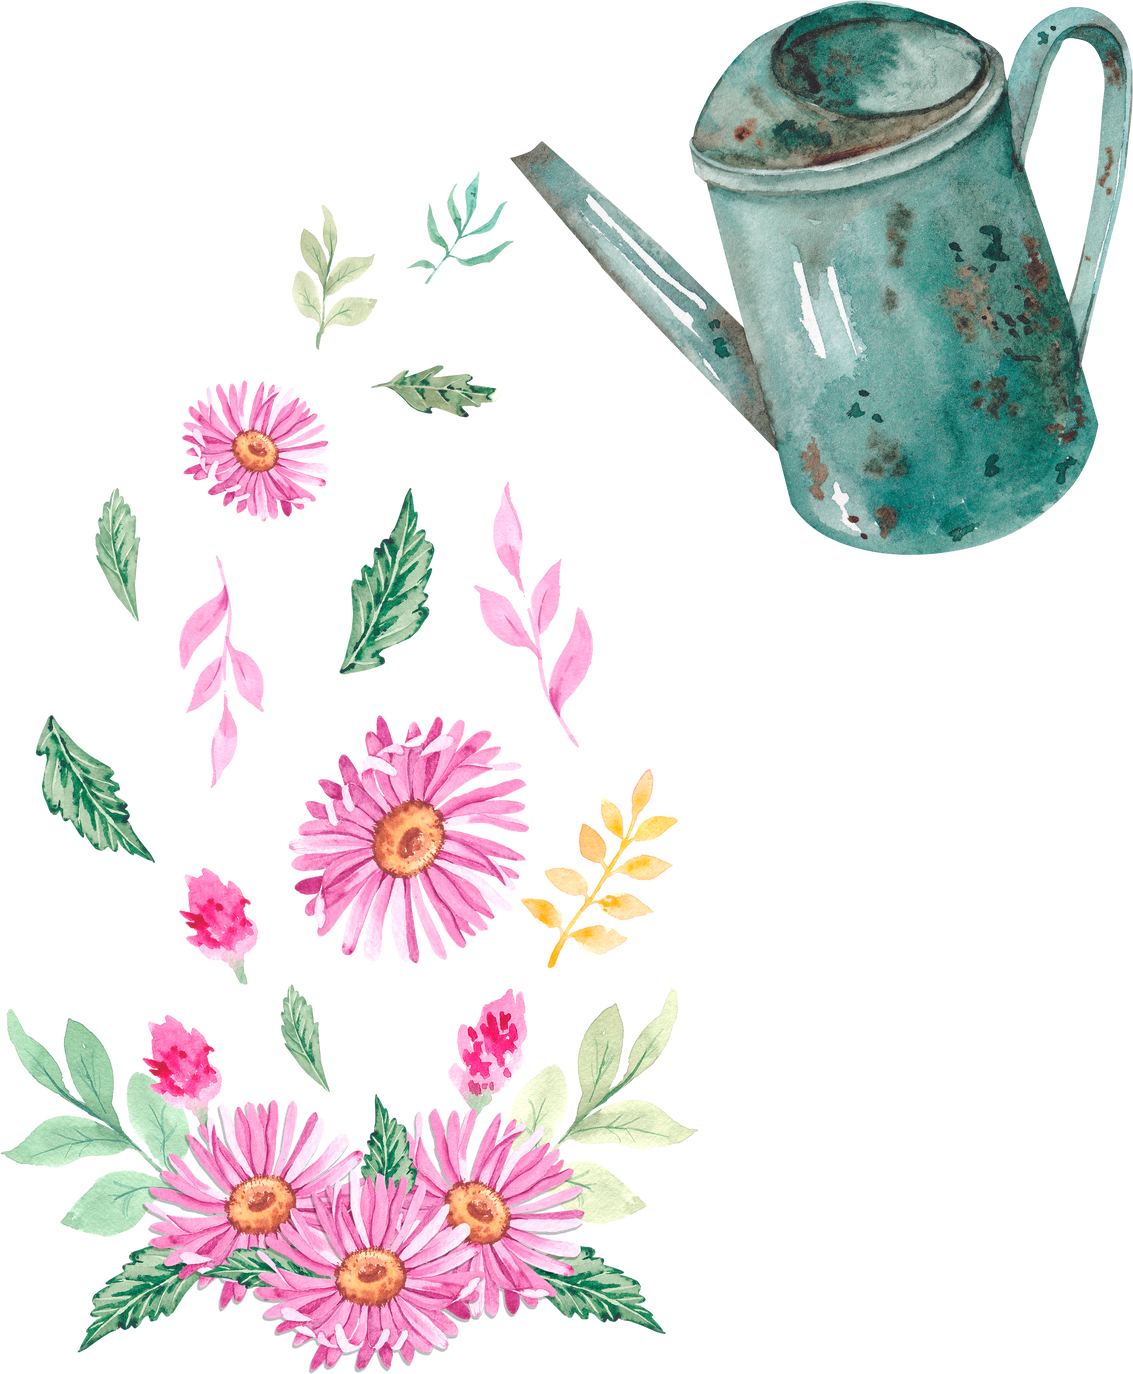 Watercolor watering can with flowers